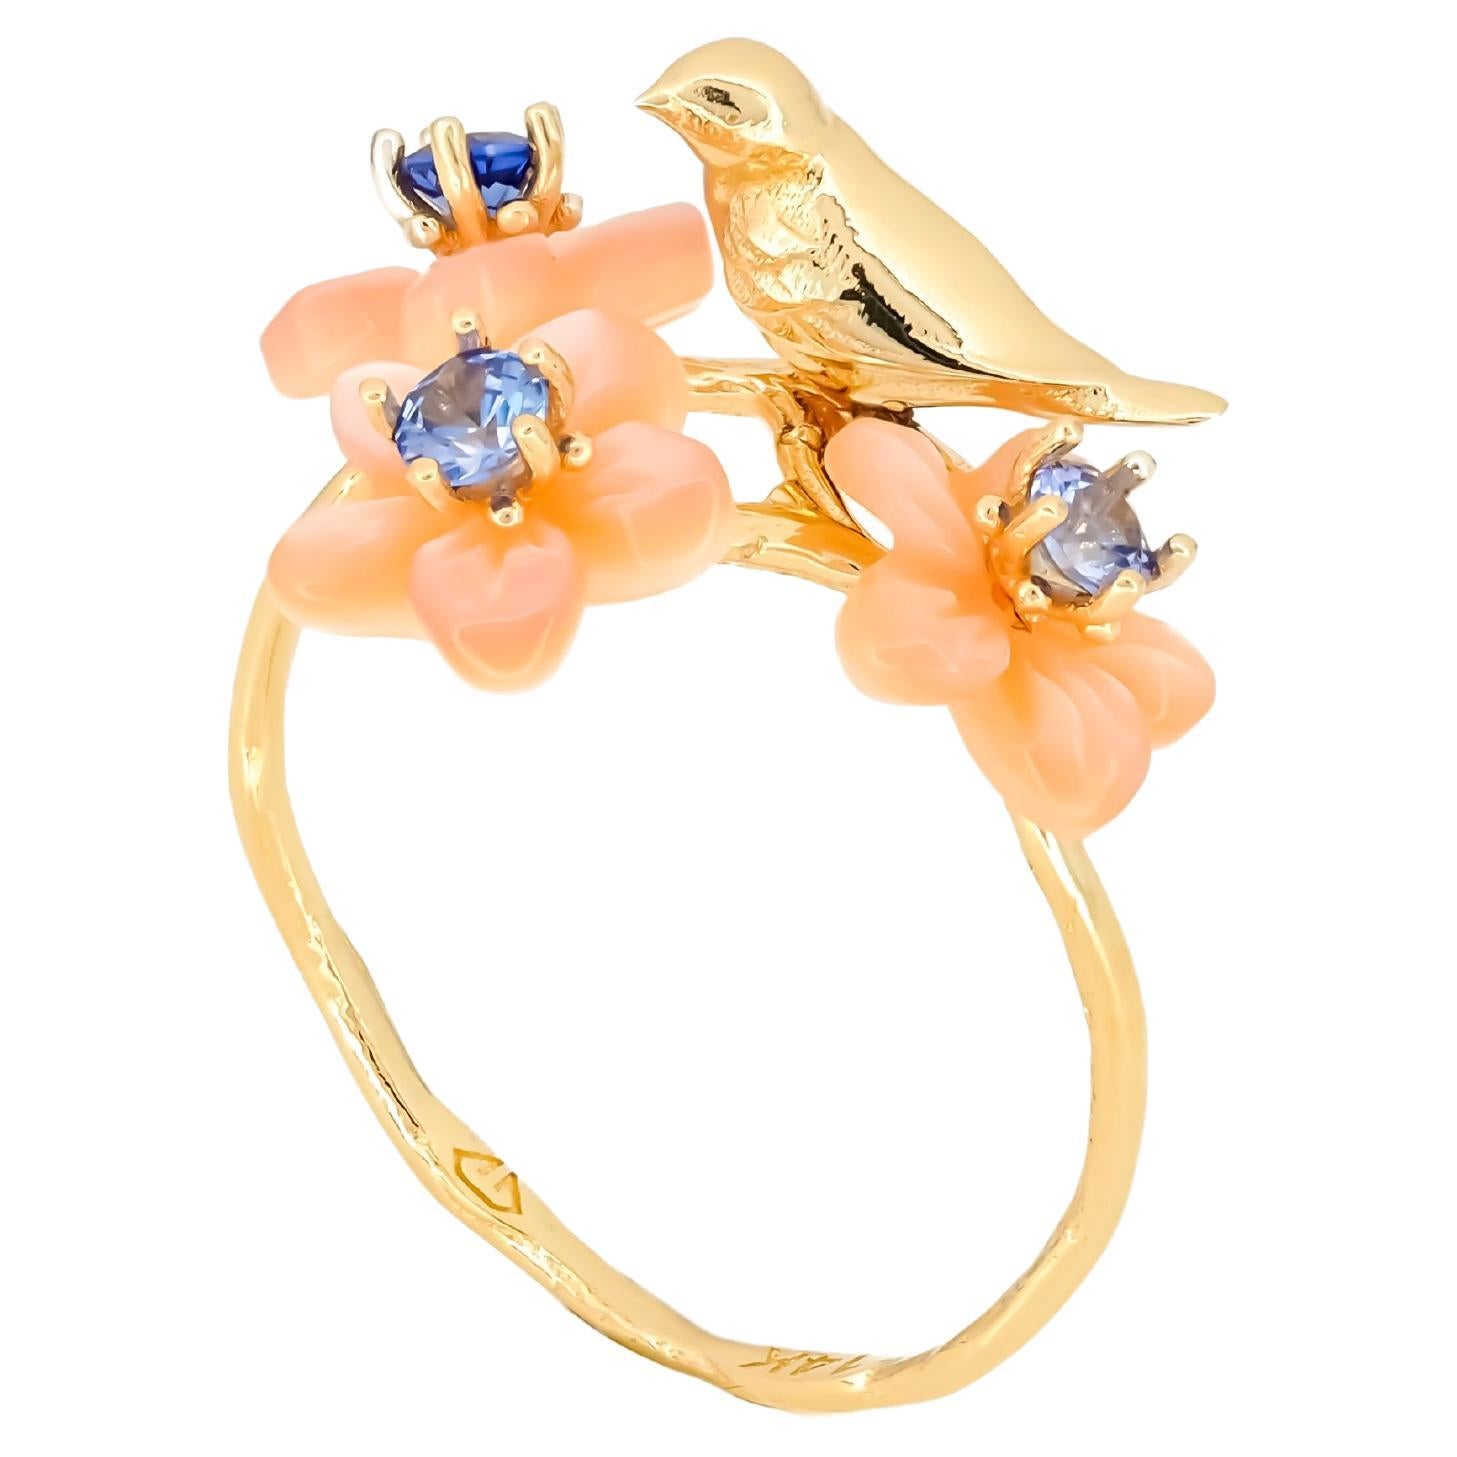 14k Gold Bird on Branch Ring. Sapphires and Carved Mother of Pearl ring!